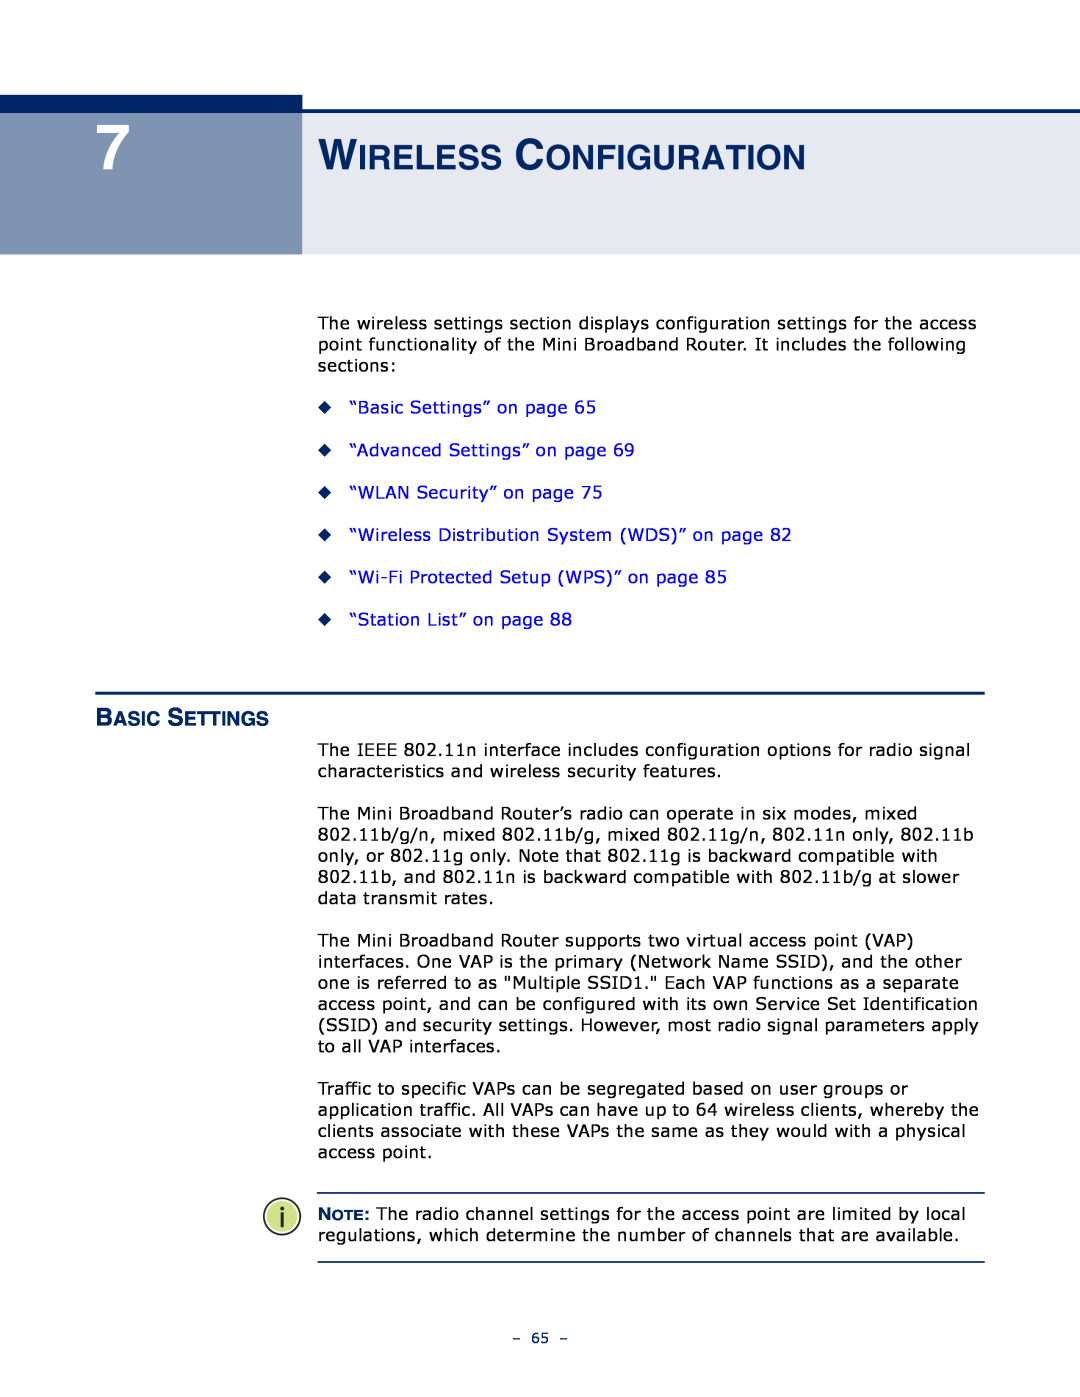 SMC Networks SMCWBR11S-N manual Wireless Configuration, “Basic Settings” on page “Advanced Settings” on page 